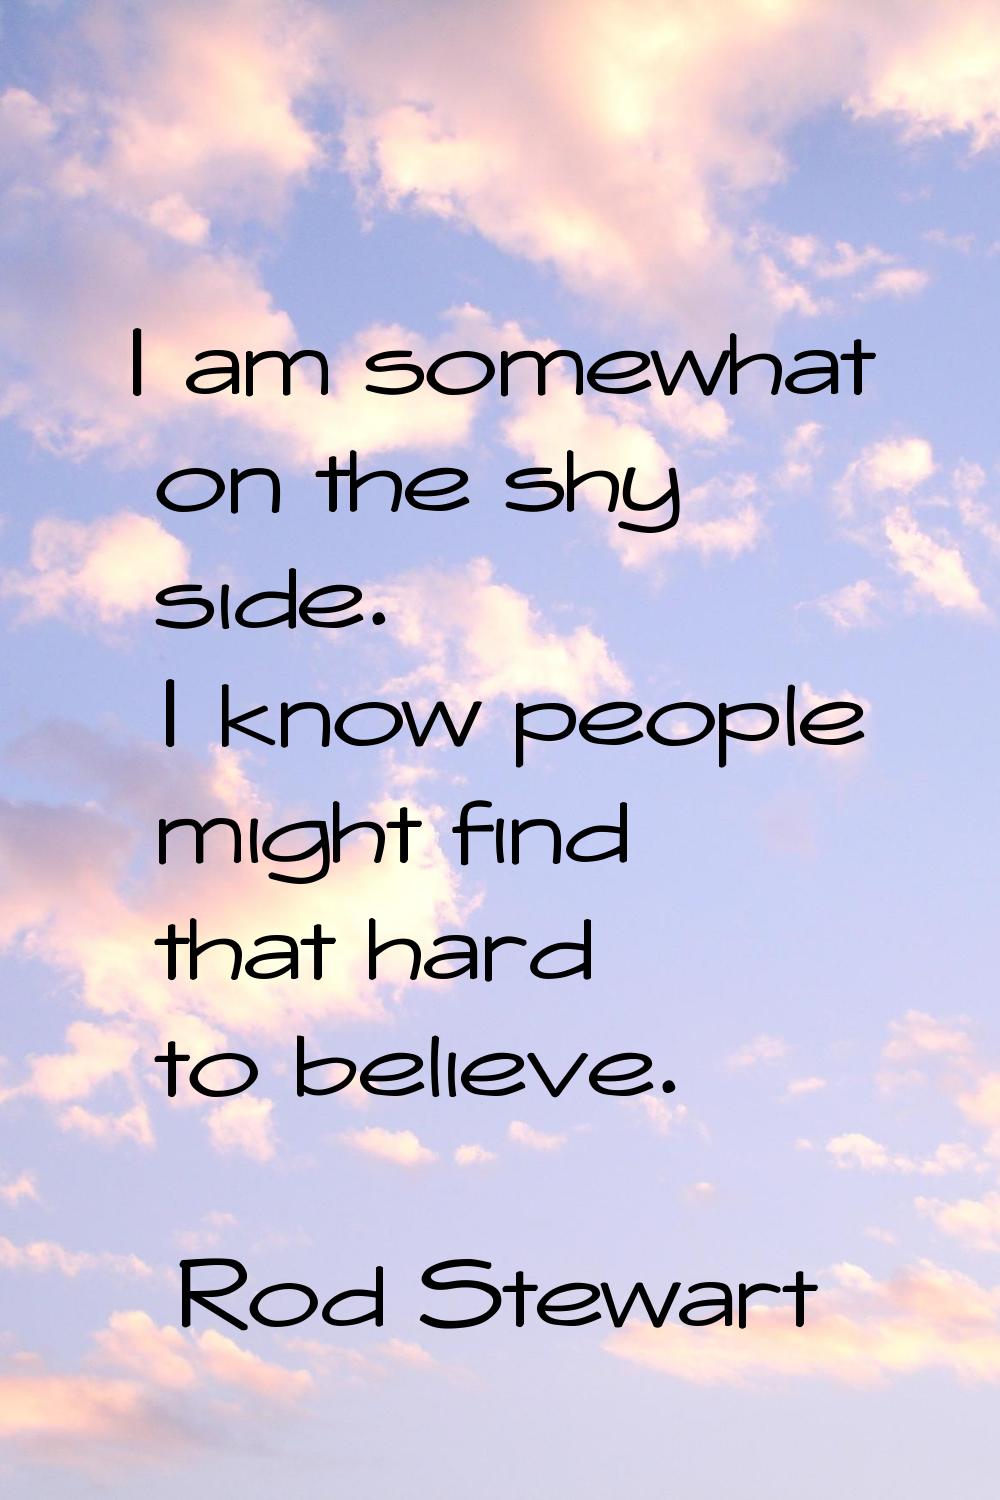 I am somewhat on the shy side. I know people might find that hard to believe.